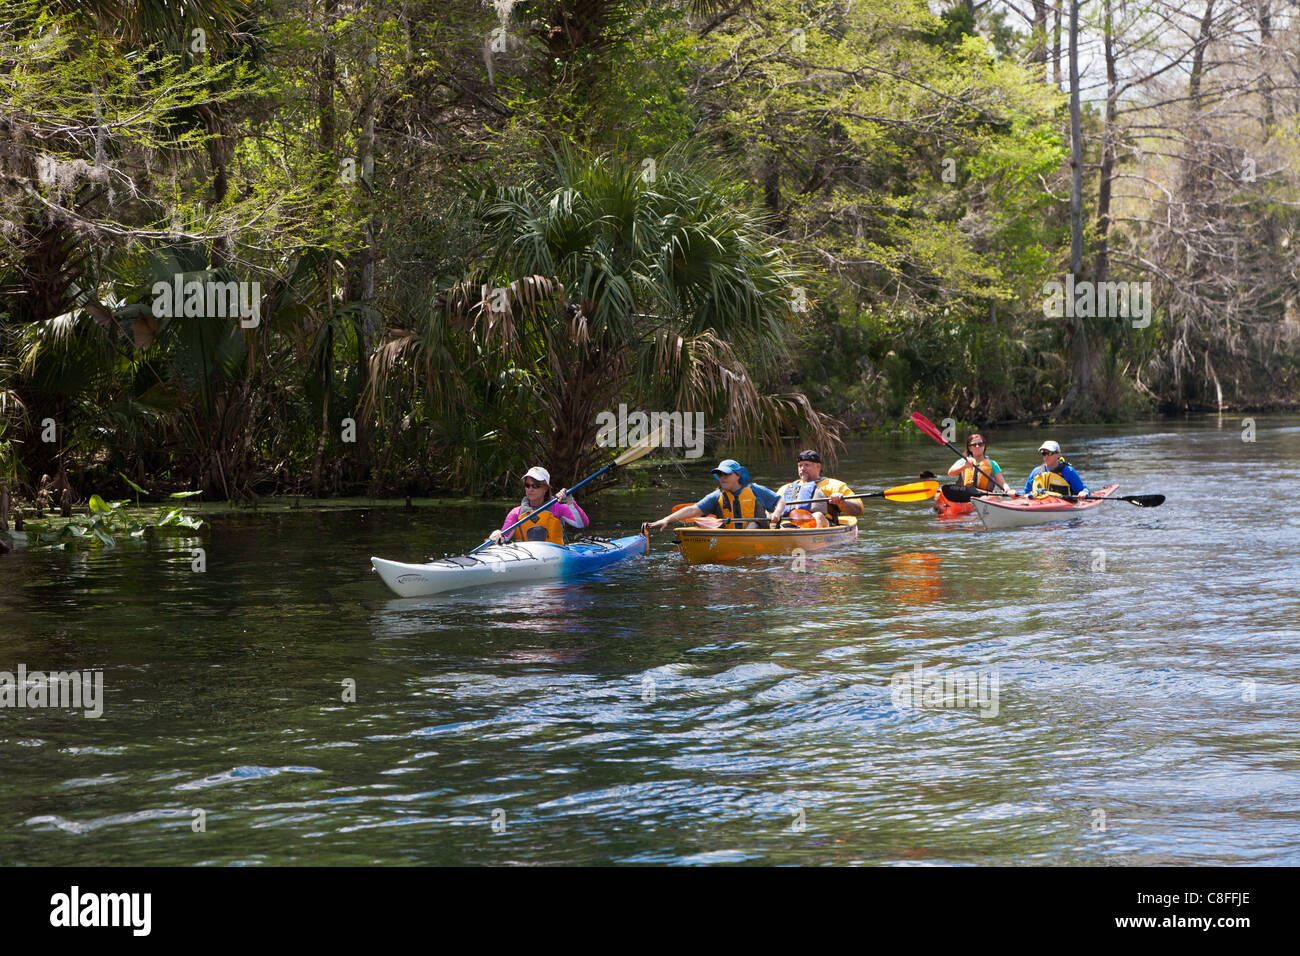 Several kayakers and a canoe on Silver River near Silver Springs State Park in Ocala Florida Stock Photo